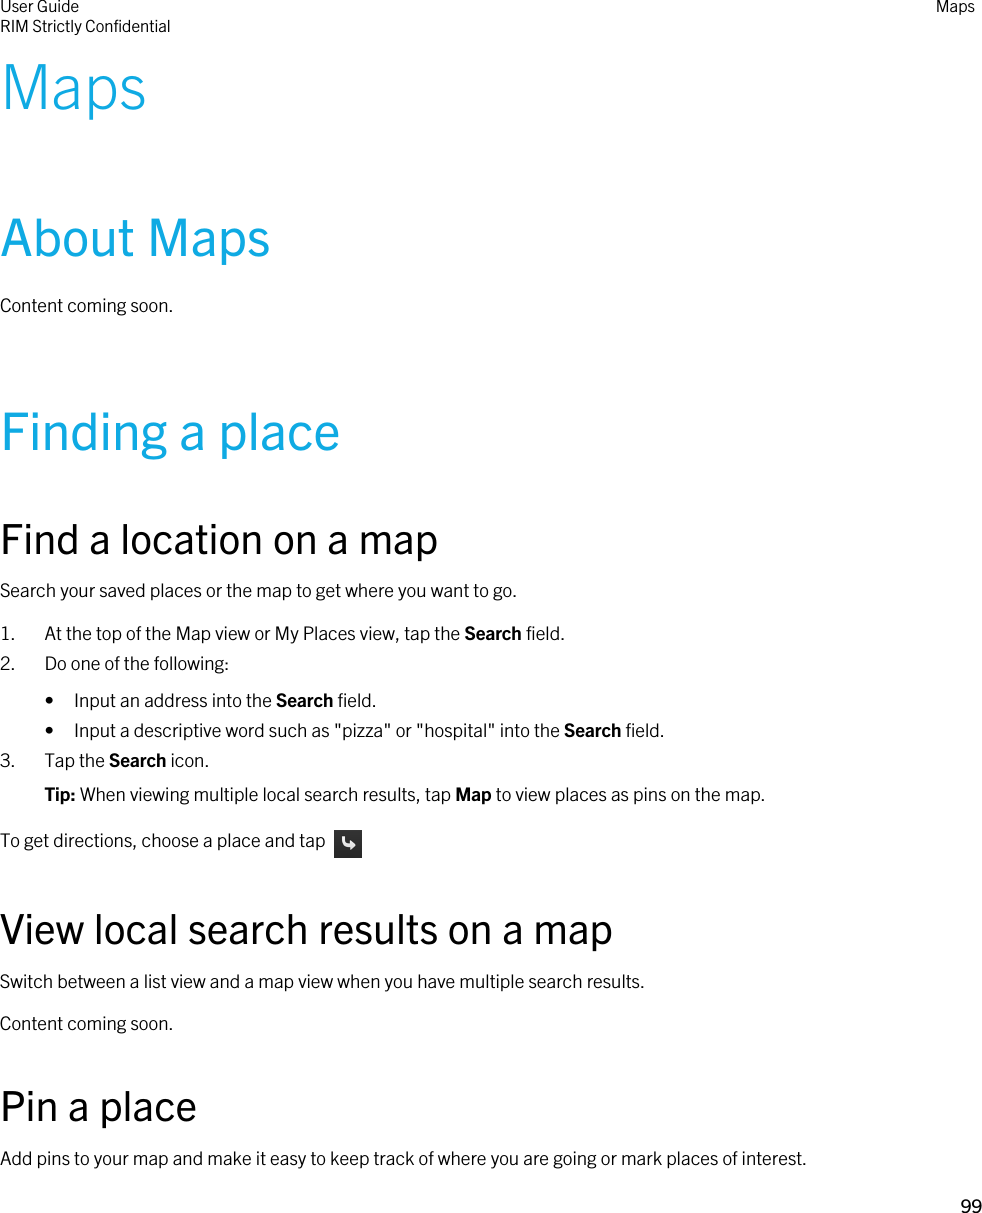 MapsAbout MapsContent coming soon.Finding a placeFind a location on a mapSearch your saved places or the map to get where you want to go.1. At the top of the Map view or My Places view, tap the Search field.2. Do one of the following:• Input an address into the Search field.• Input a descriptive word such as &quot;pizza&quot; or &quot;hospital&quot; into the Search field.3. Tap the Search icon.Tip: When viewing multiple local search results, tap Map to view places as pins on the map.To get directions, choose a place and tap View local search results on a mapSwitch between a list view and a map view when you have multiple search results.Content coming soon.Pin a placeAdd pins to your map and make it easy to keep track of where you are going or mark places of interest.User GuideRIM Strictly ConfidentialMaps99 